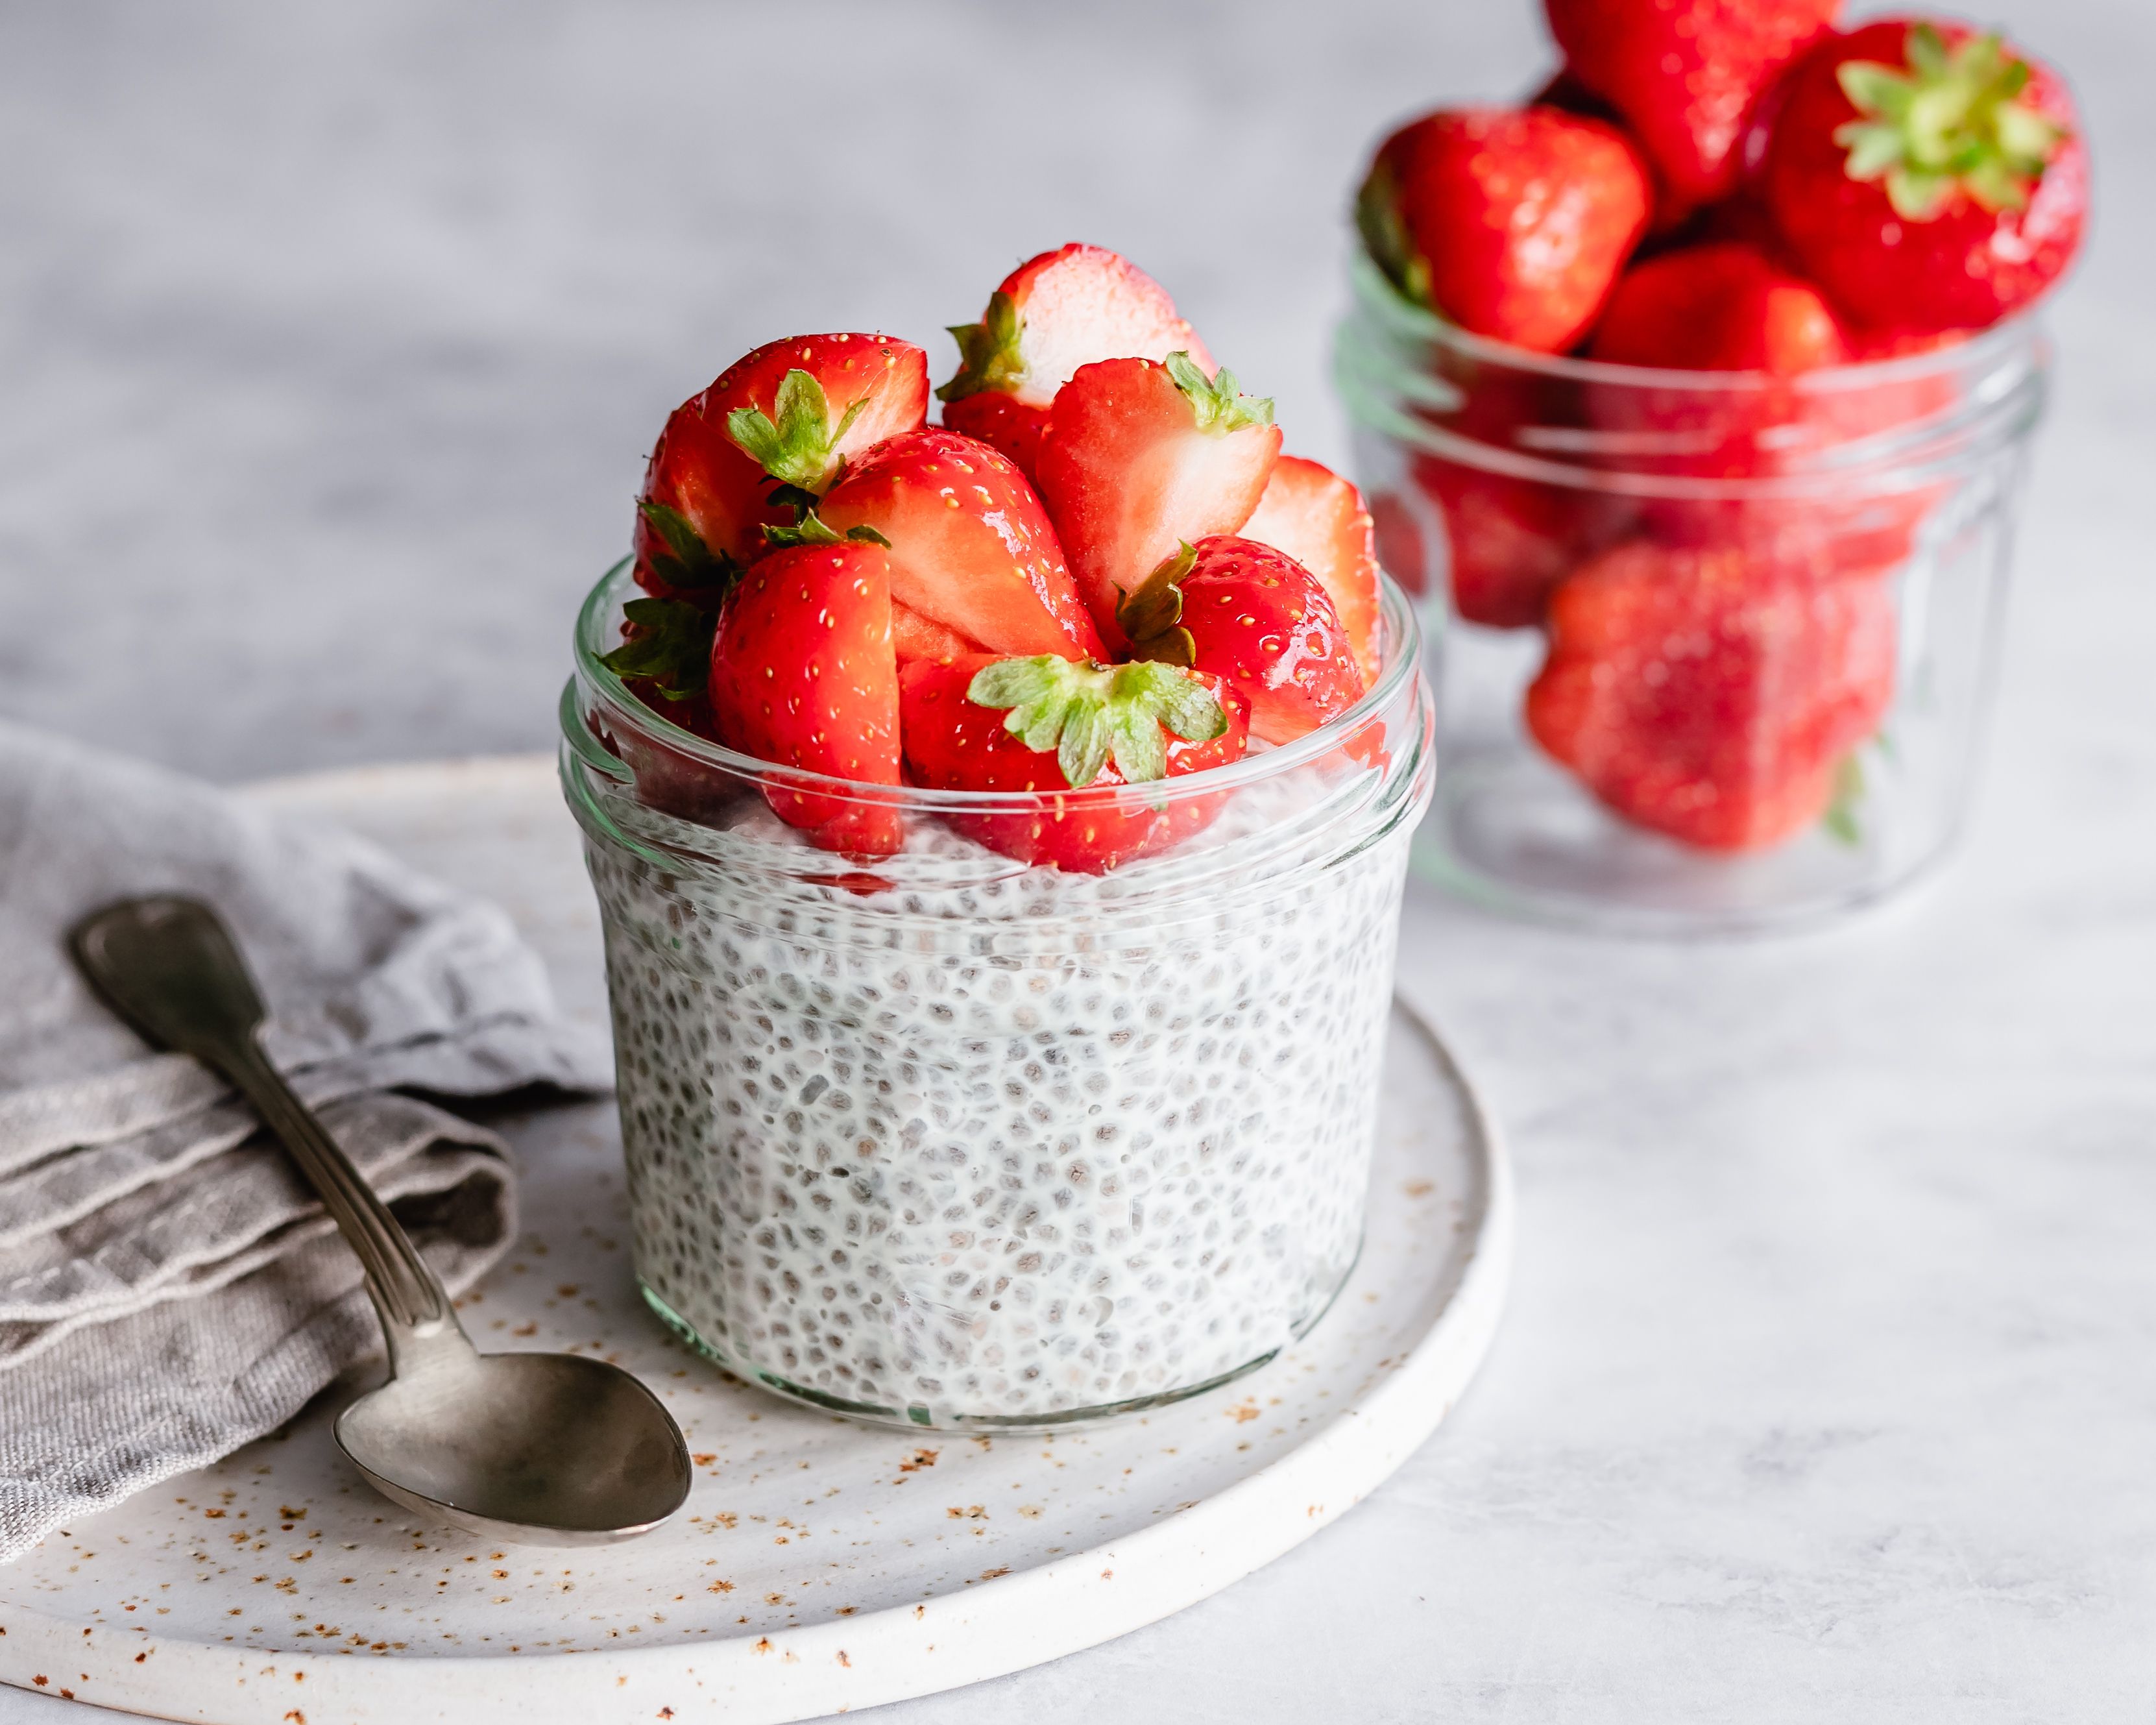 https://hips.hearstapps.com/hmg-prod/images/jar-of-chia-pudding-topped-with-fresh-strawberries-royalty-free-image-1657746263.jpg